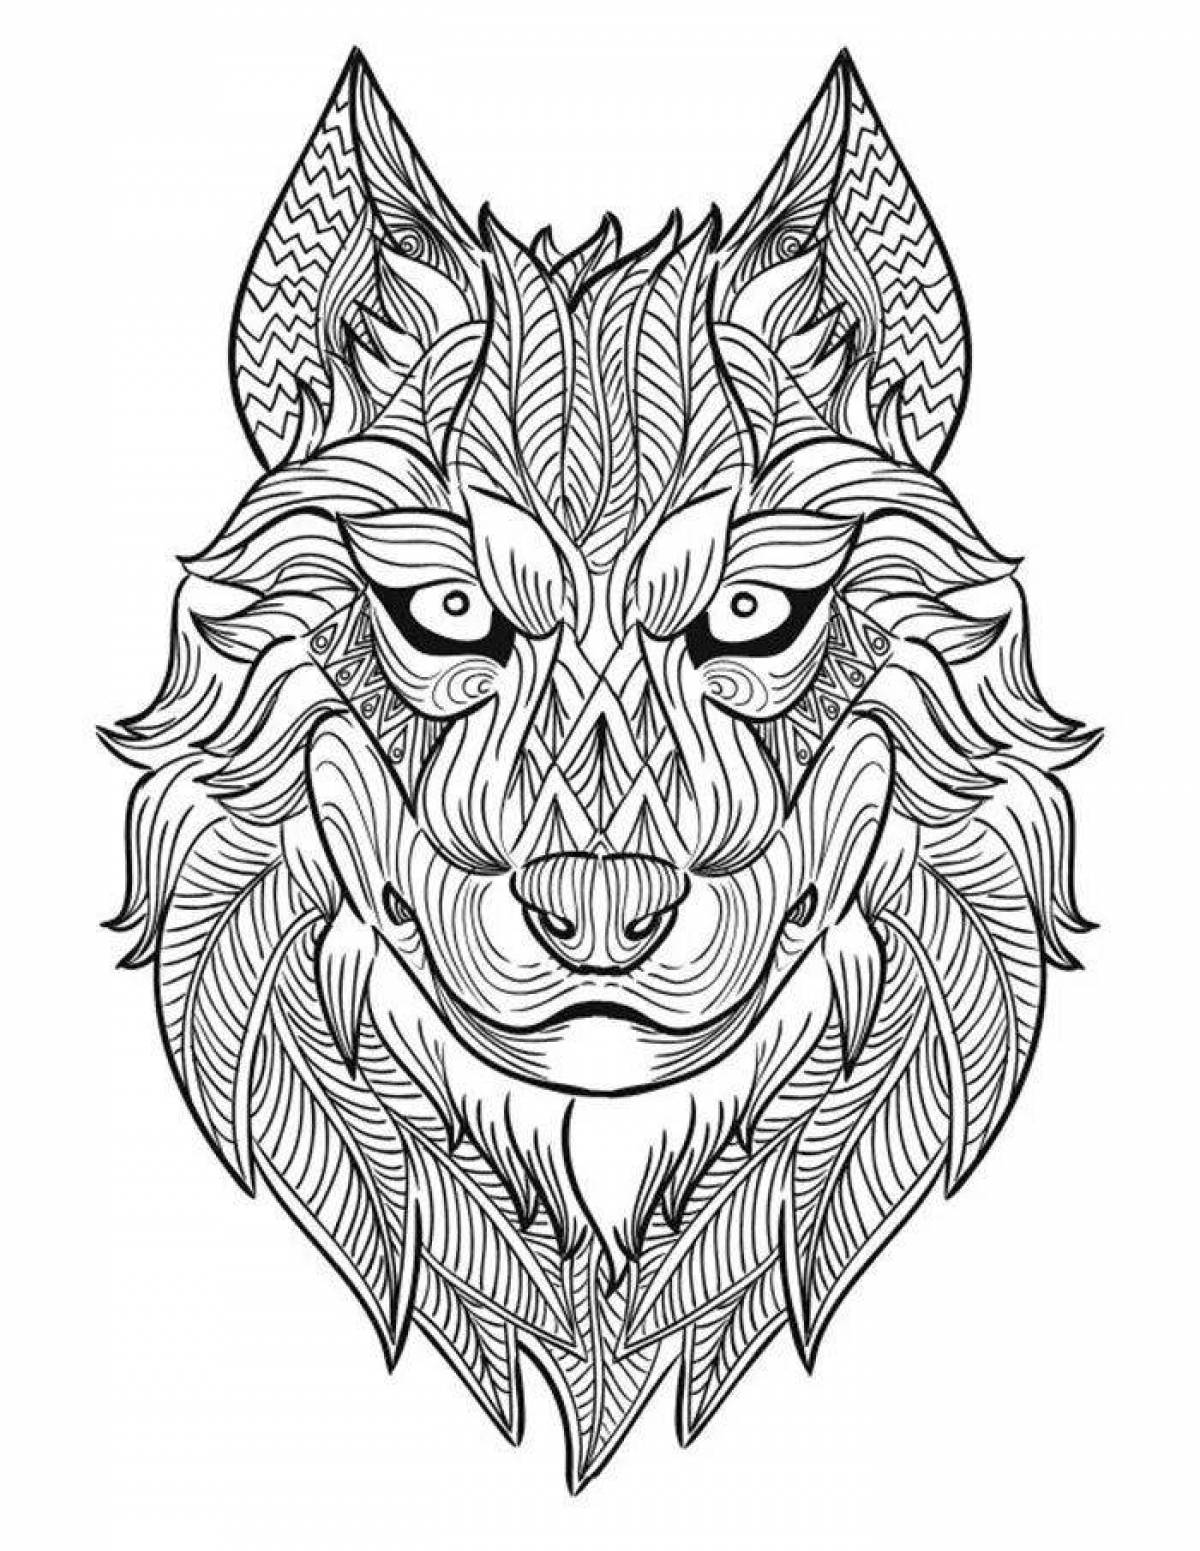 Great antistress wolf coloring book